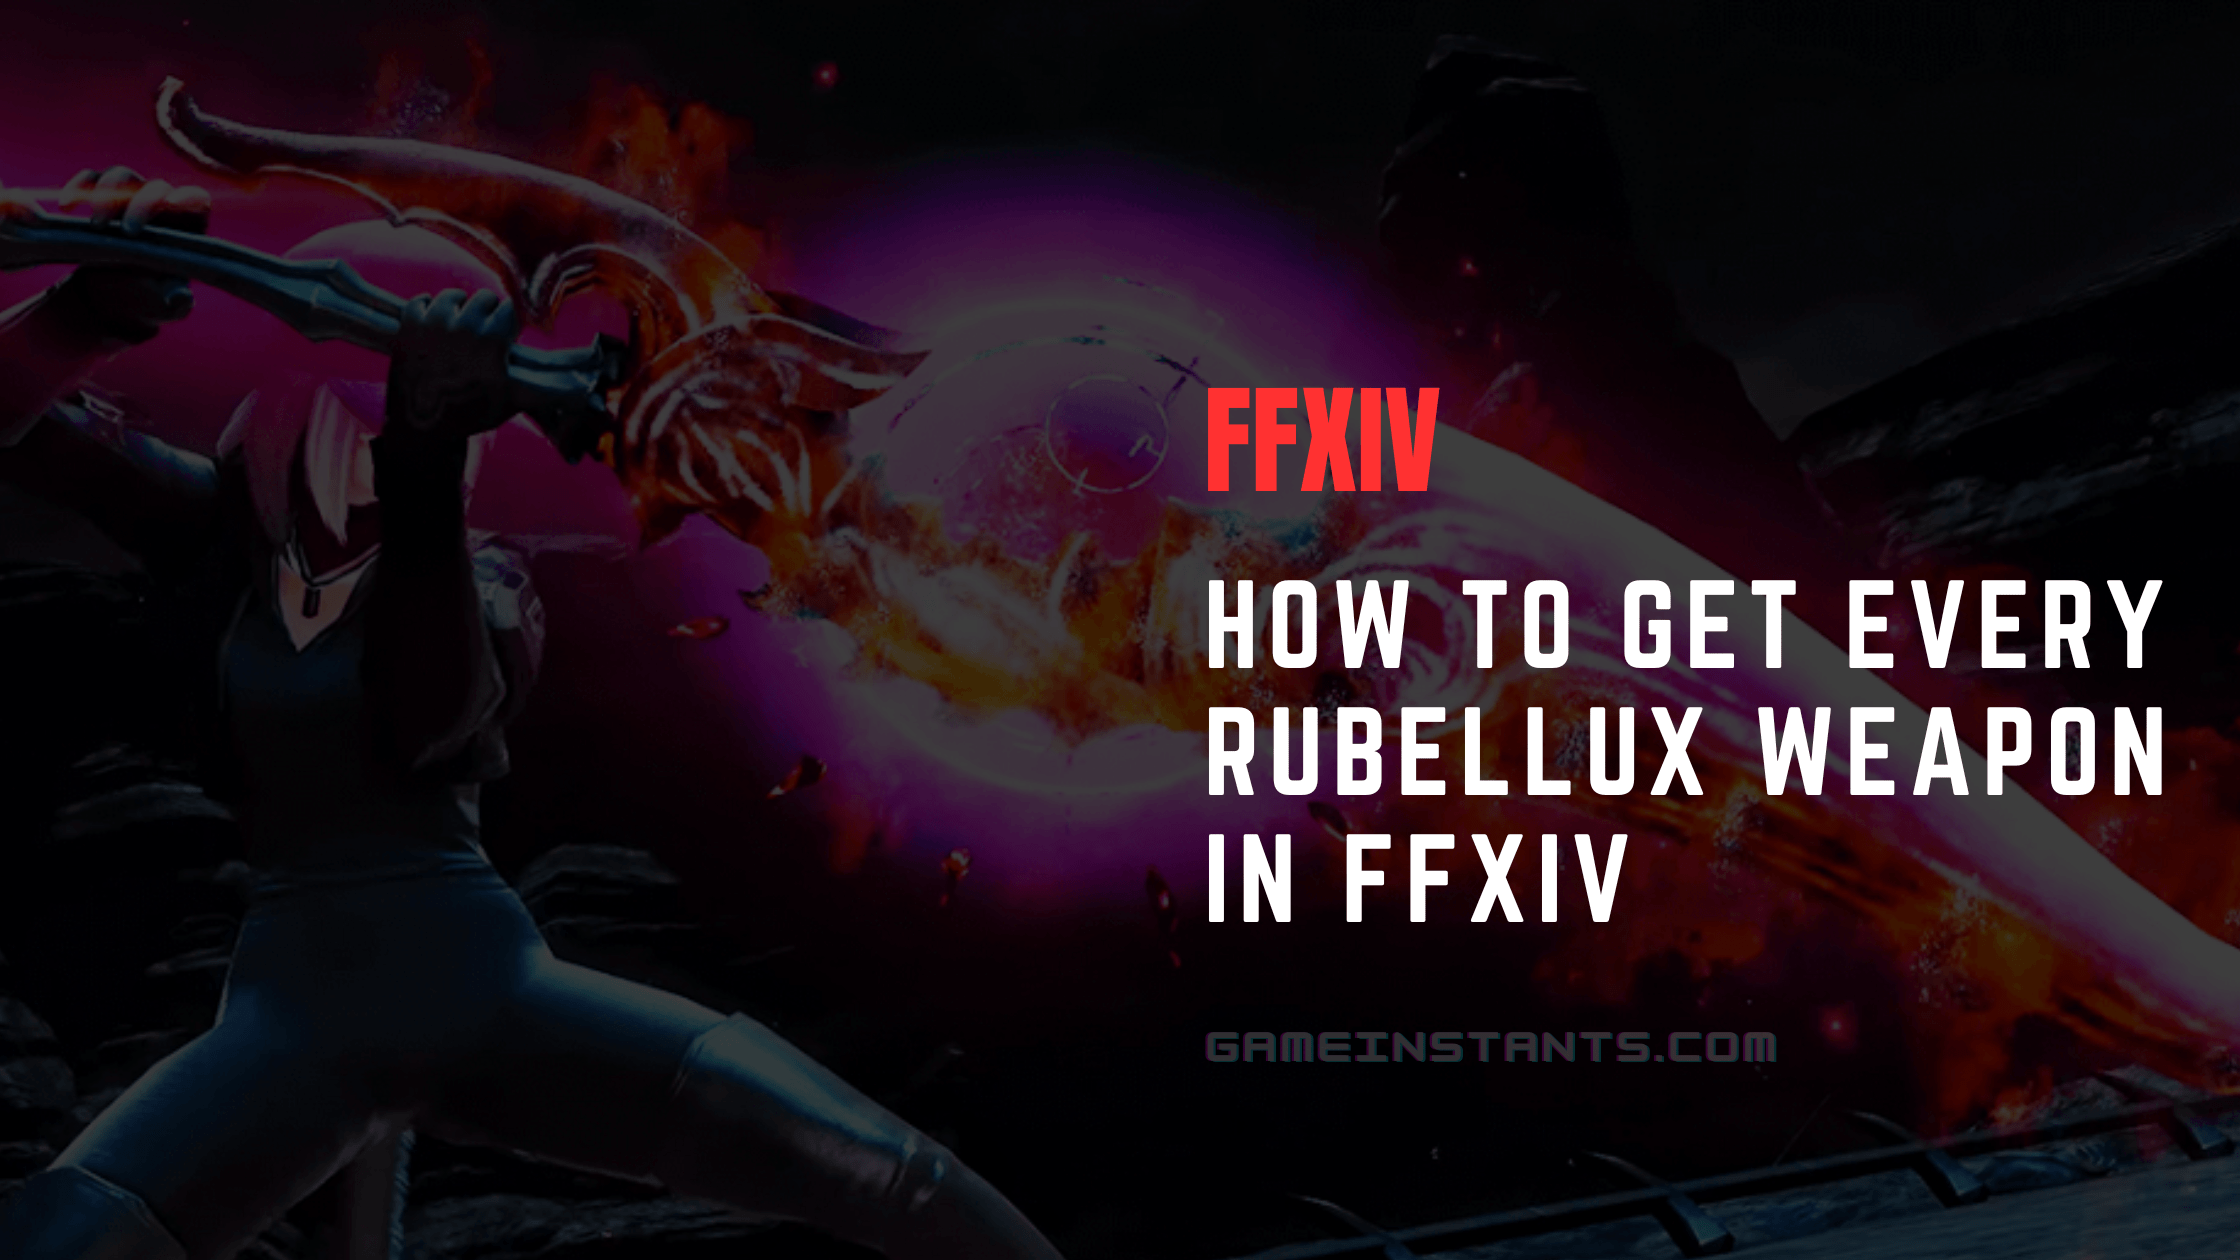 How To Get Every Rubellux Weapon in FFXIV